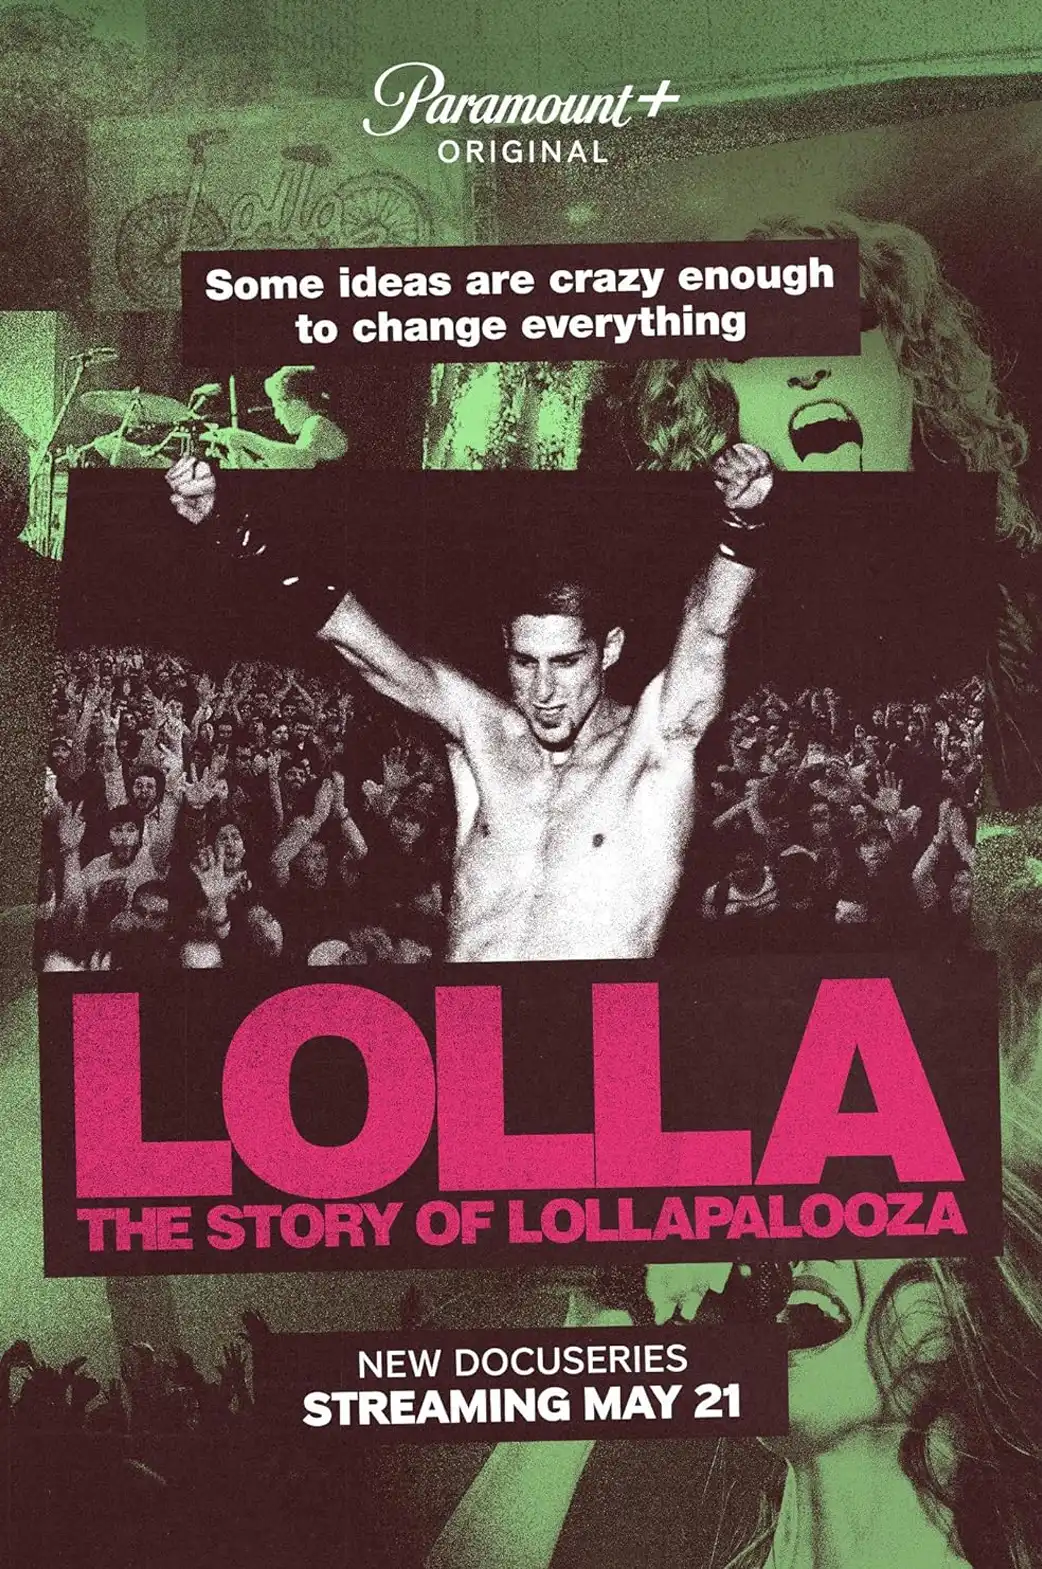 LOLLA The Story of Lollapalooza Soundtrack